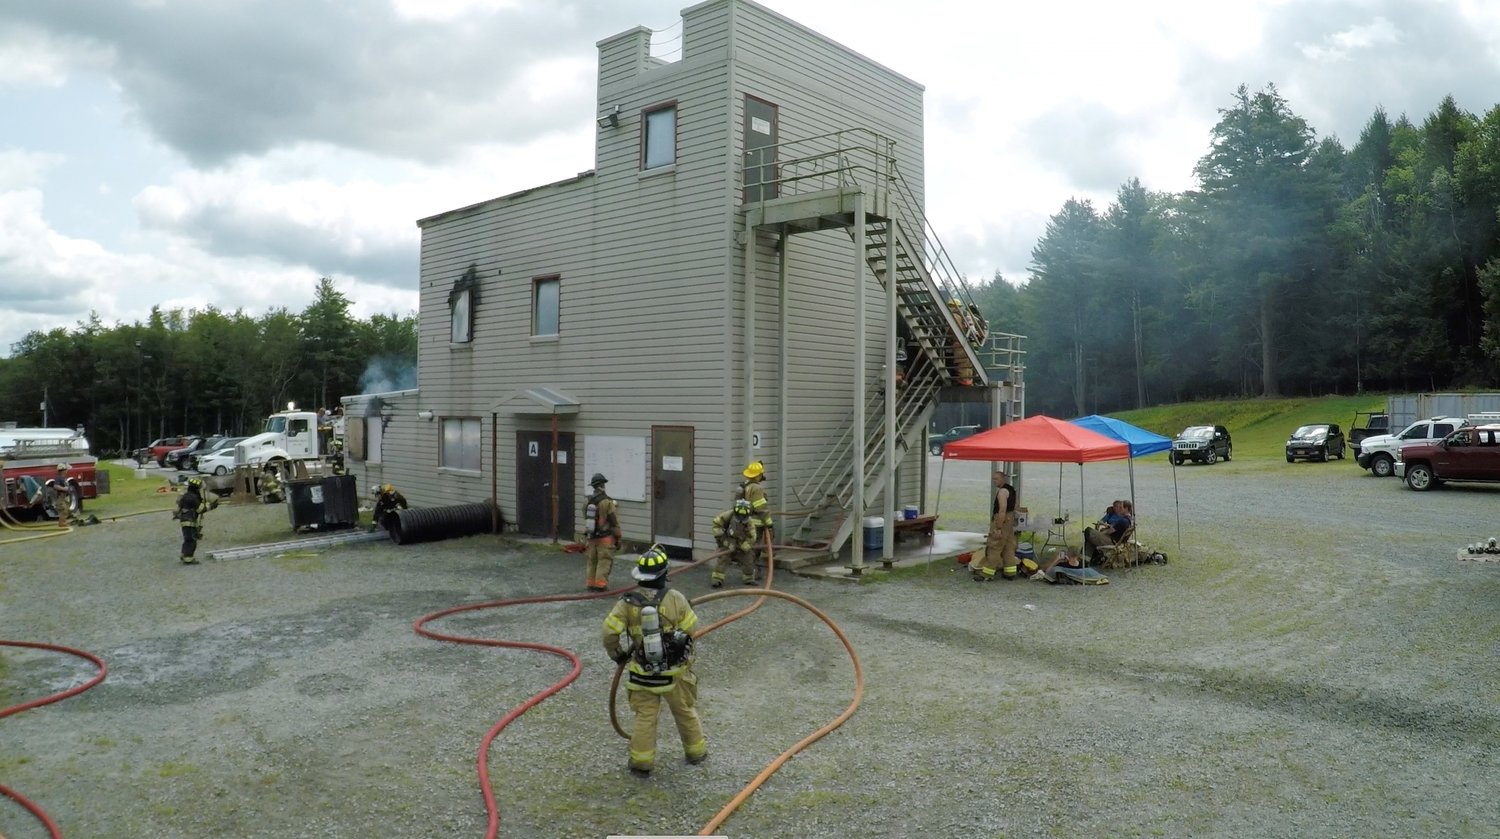 Firefighters practice on a reusable simulator located at the Sullivan County Fire Training Facility in White Lake, NY. The January 2023 program that will teach firematics and Emergency Management Training will be available for area youth.